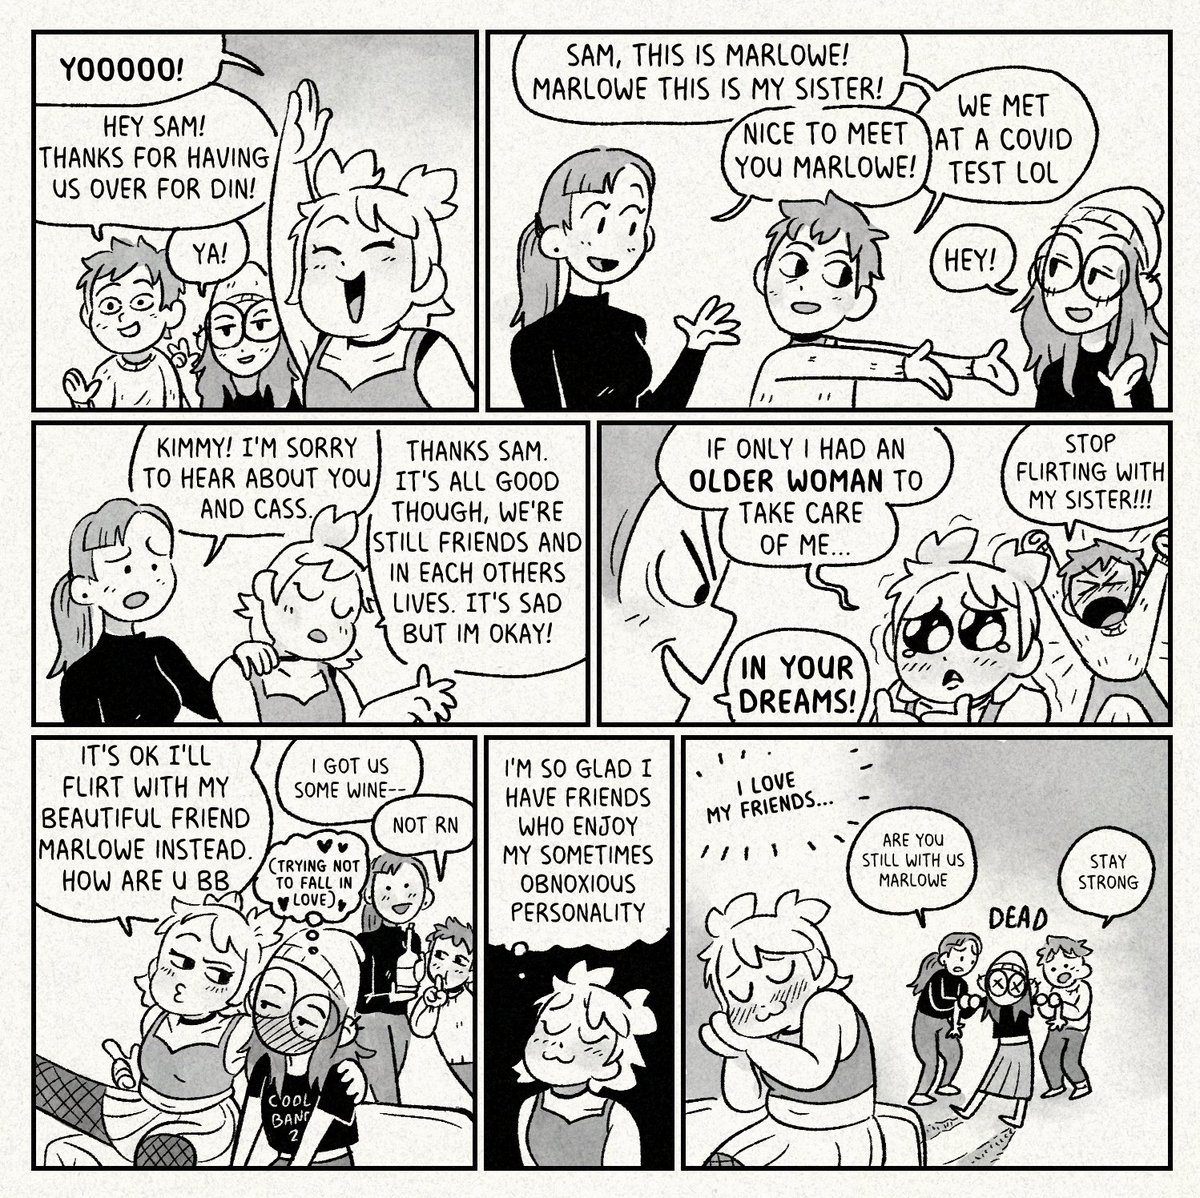 Dinner at Sams!!!  (In case it's not clear from the general tone of these comics, kimmy is careful not to cross any lines with their friends! All flirting is consensual fun for everyone lol)